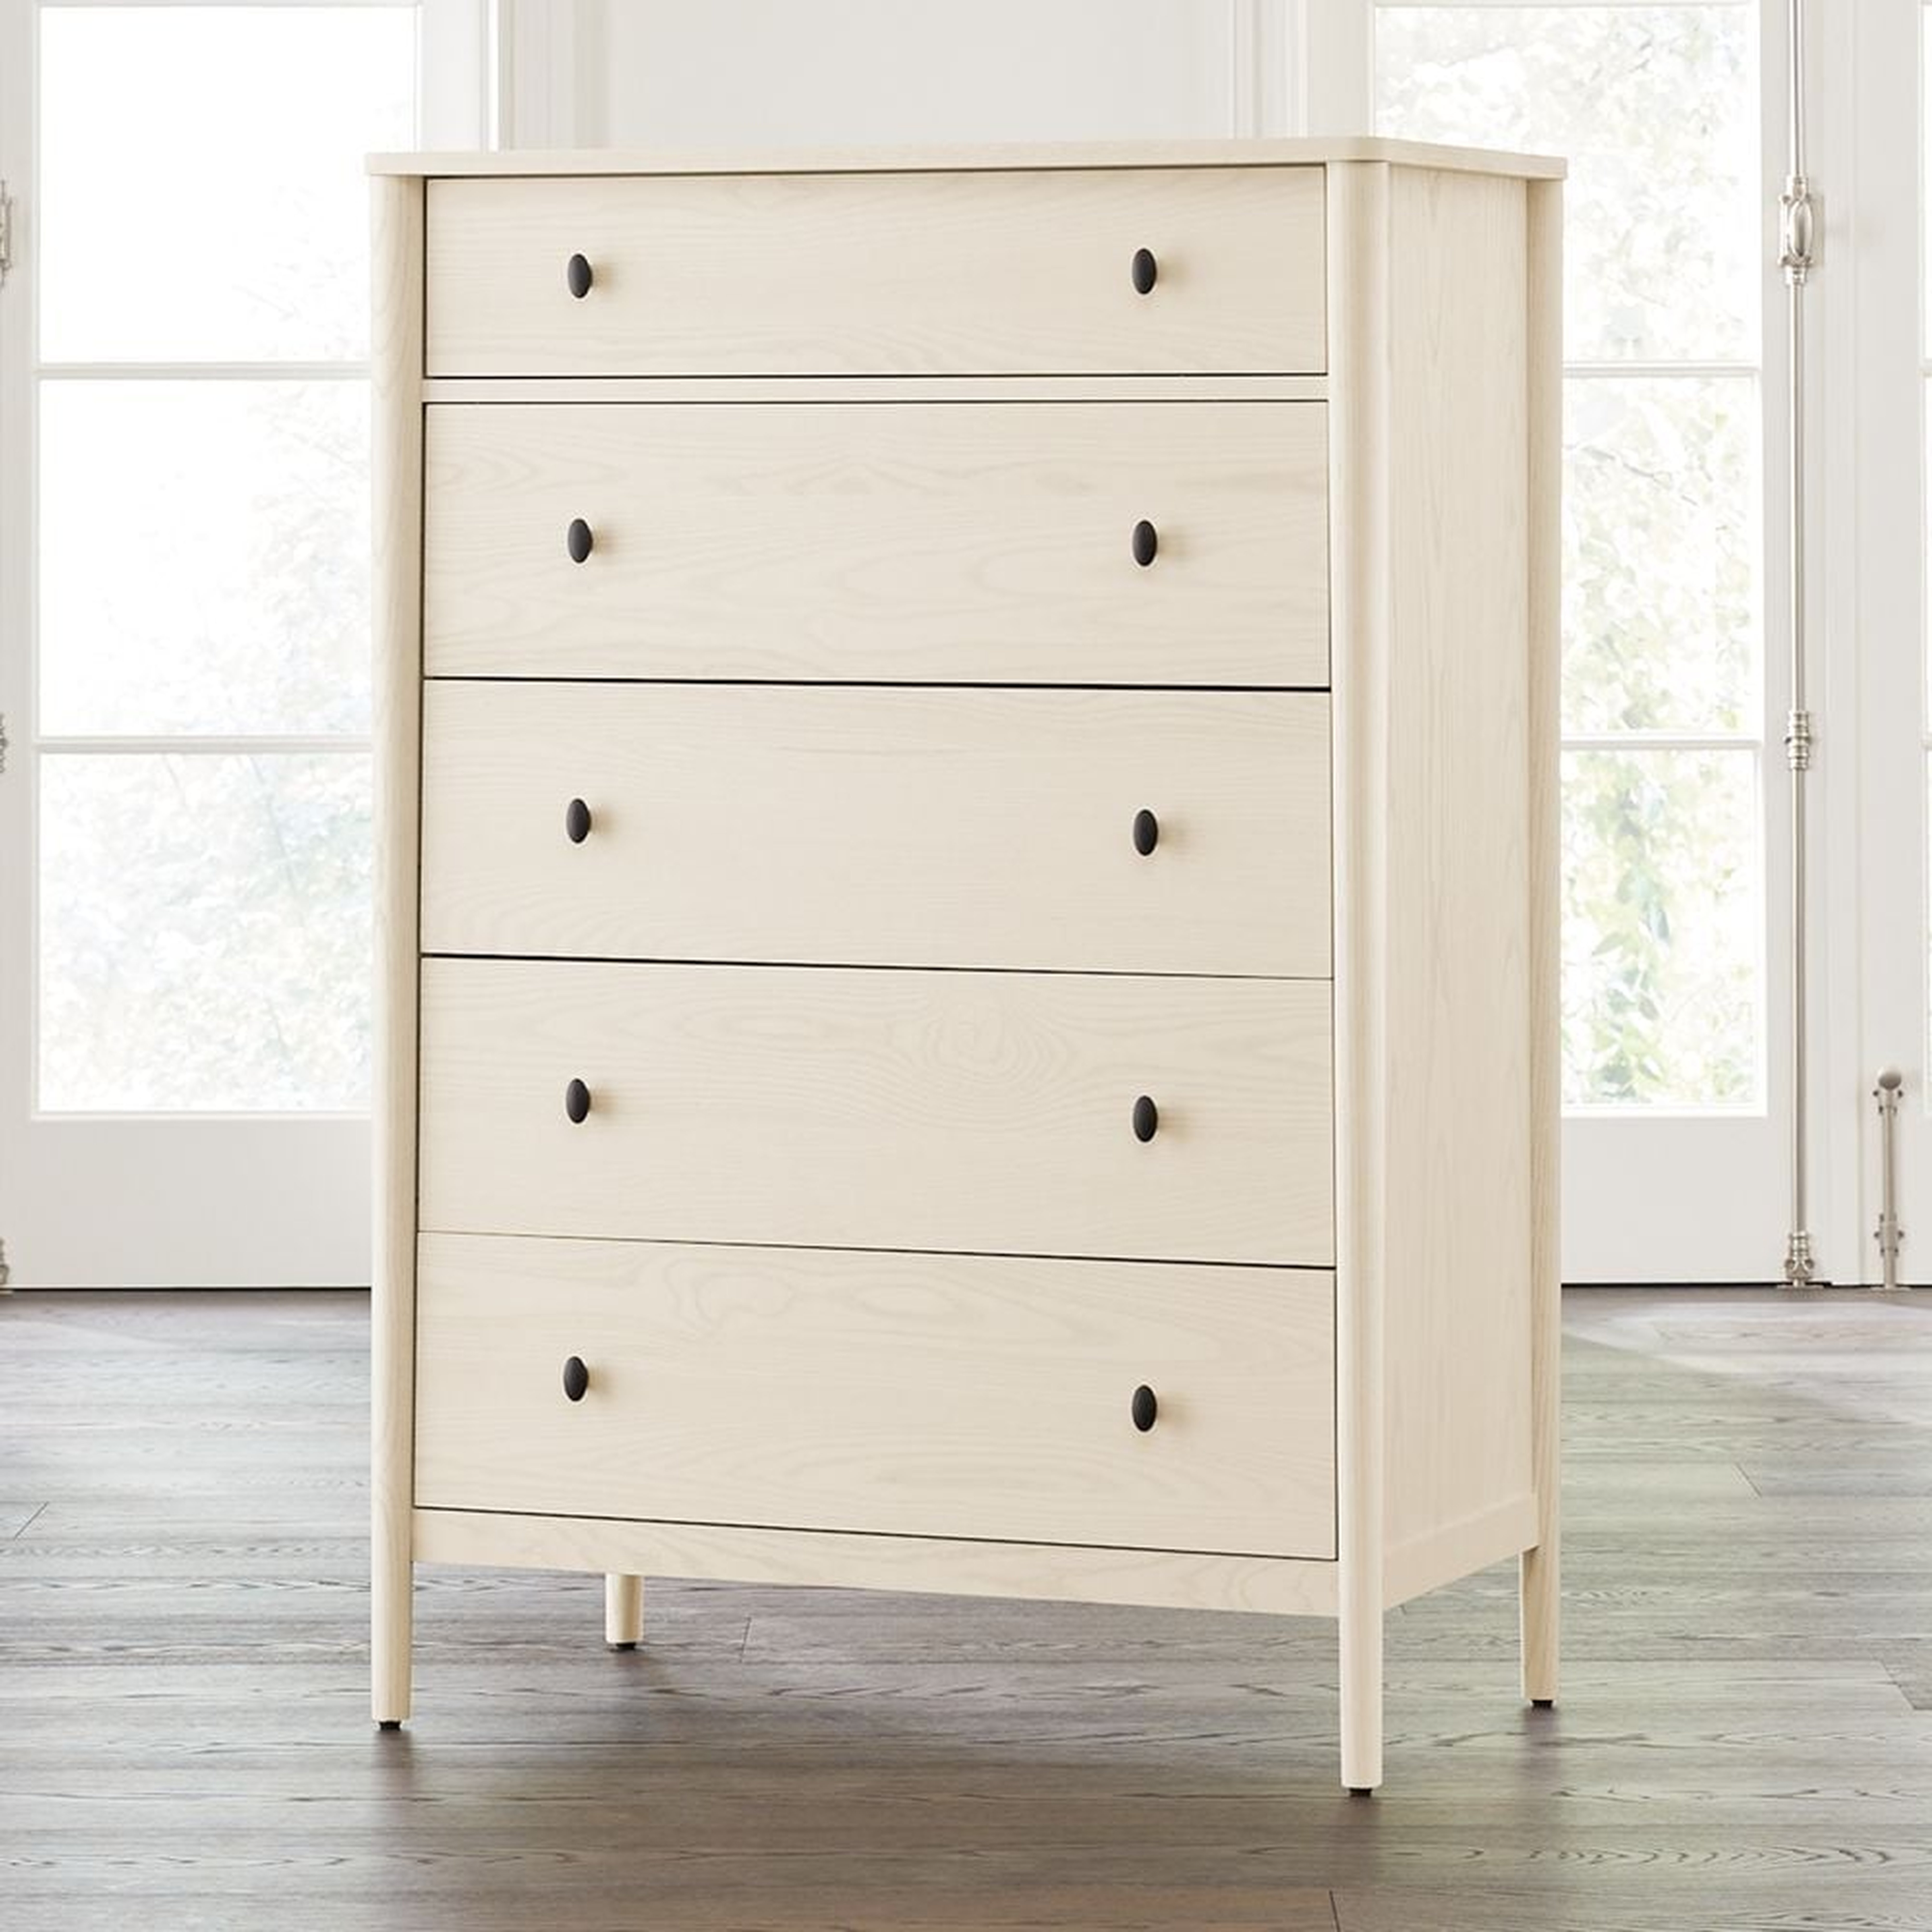 Gia Cream Ash 5-Drawer Dresser - Crate and Barrel